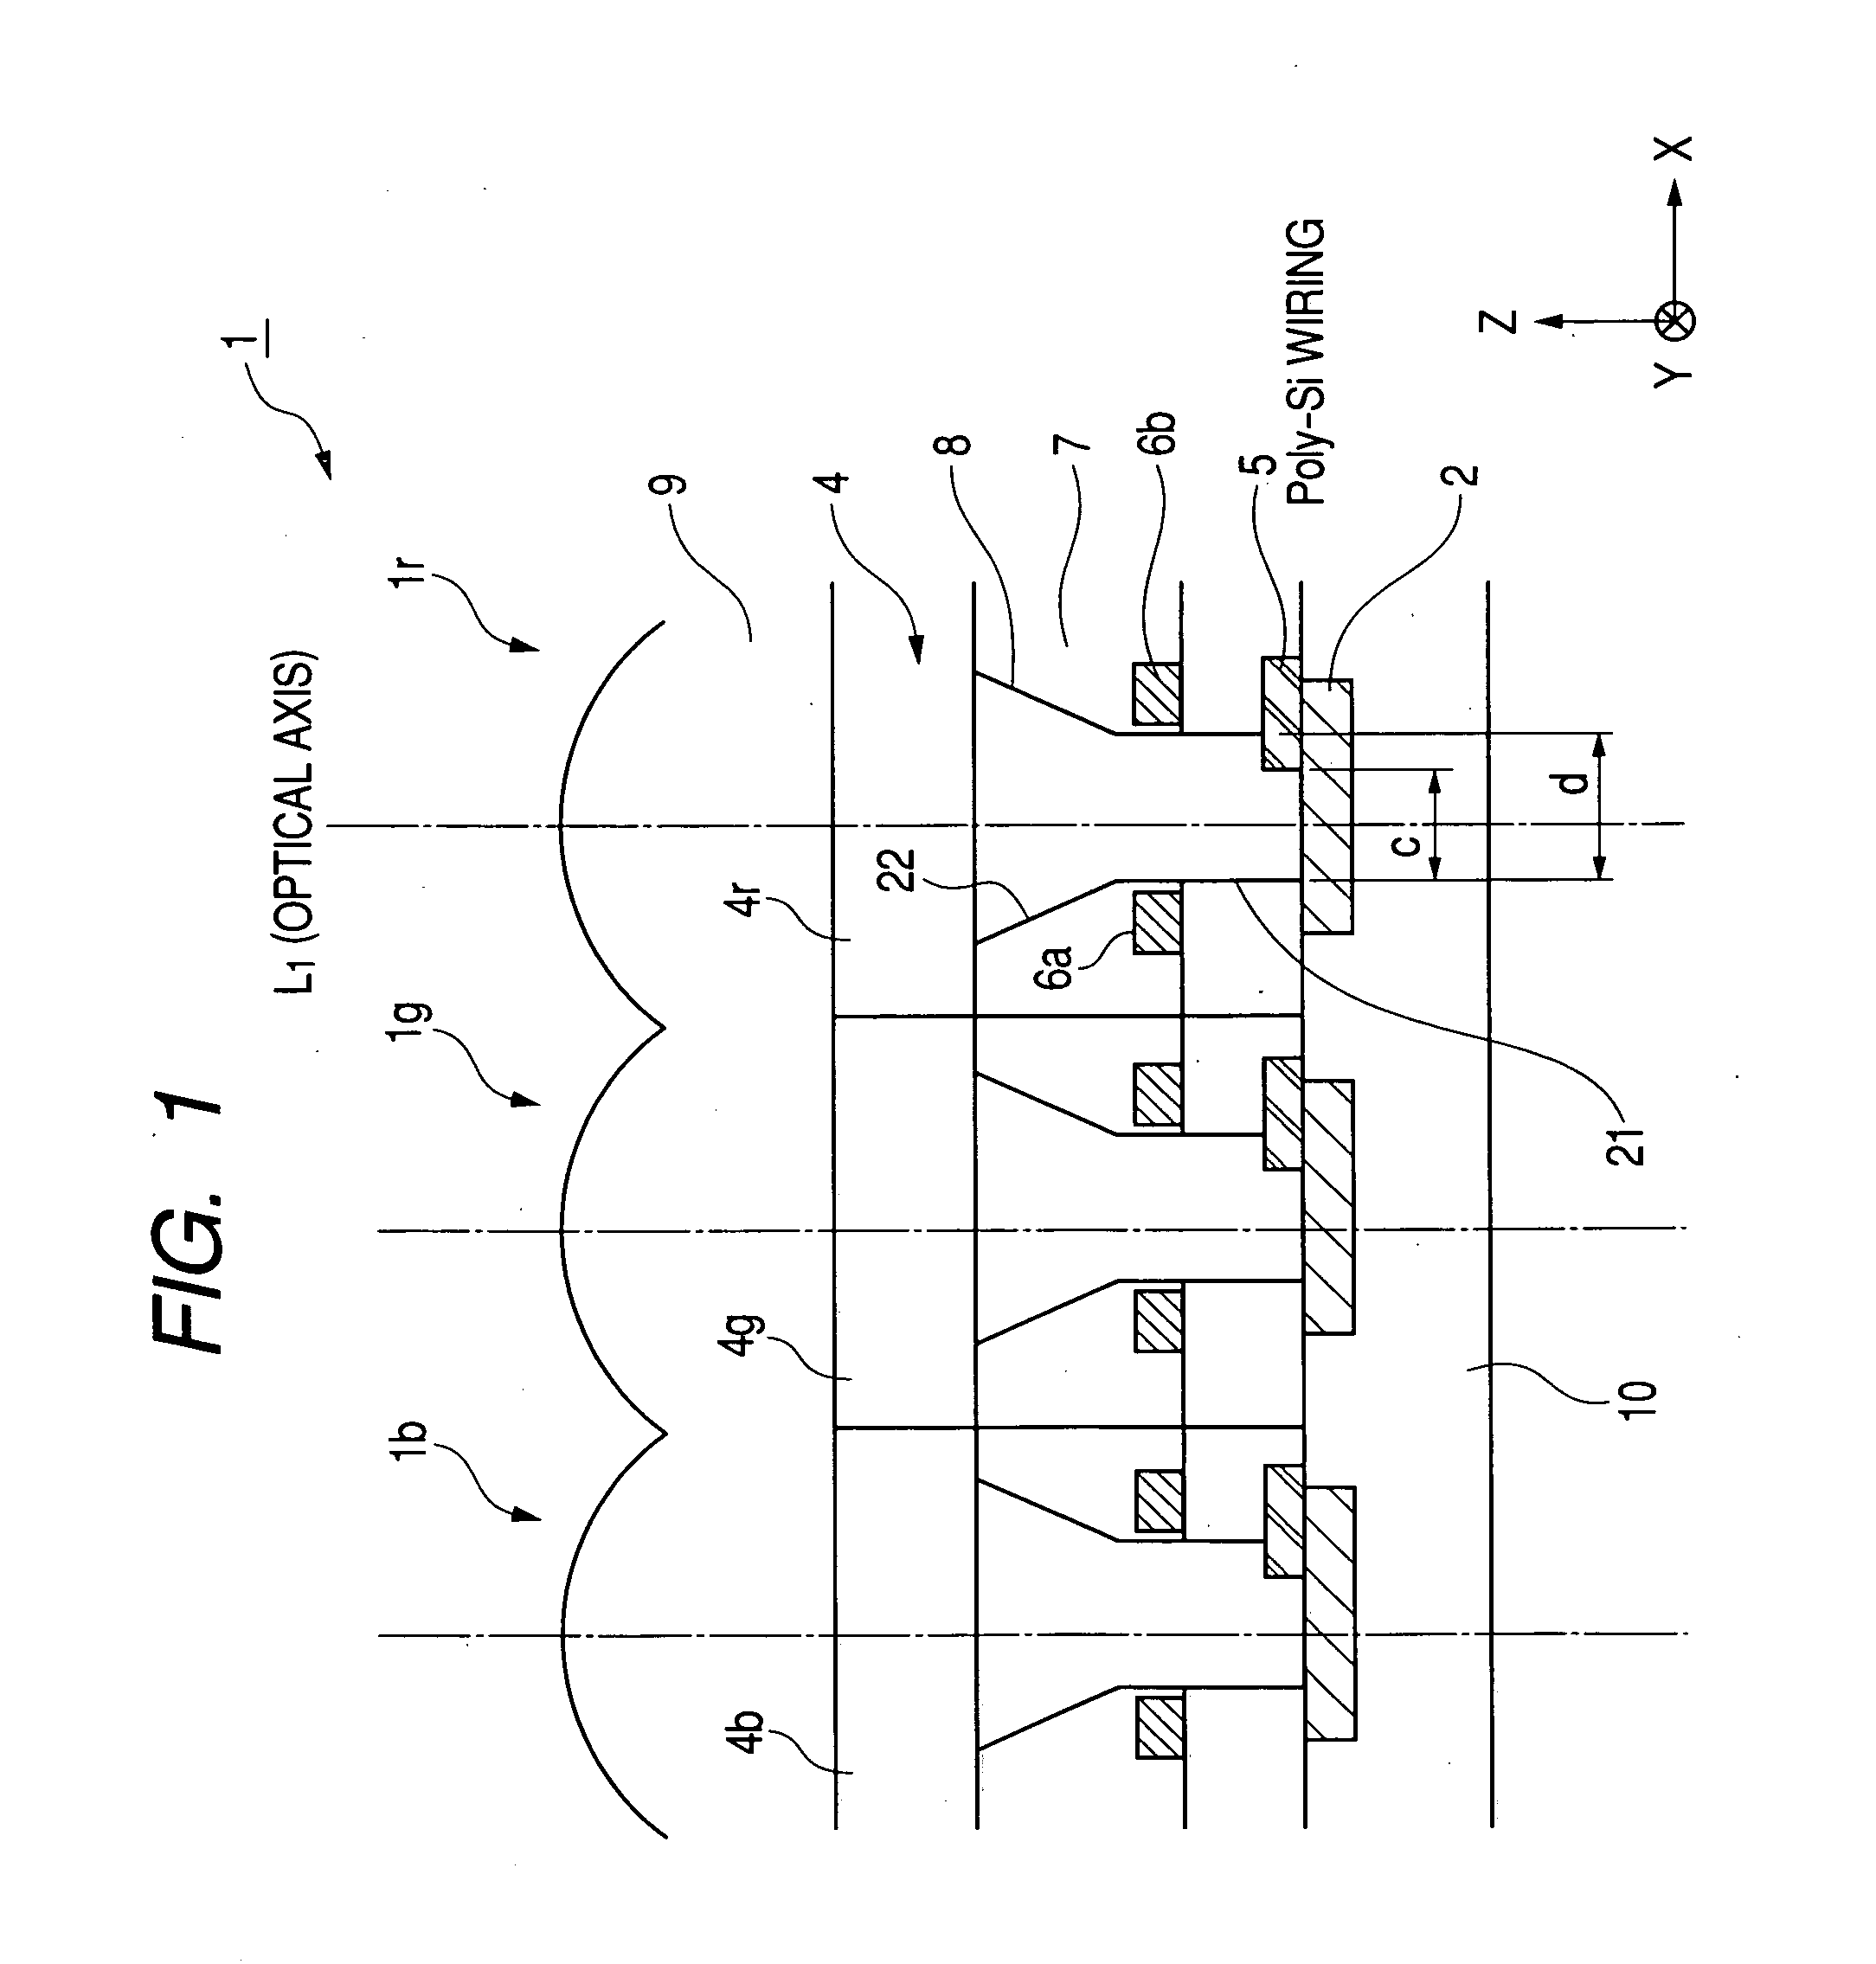 Image pick-up device and image pick-up system using the image pick-up device